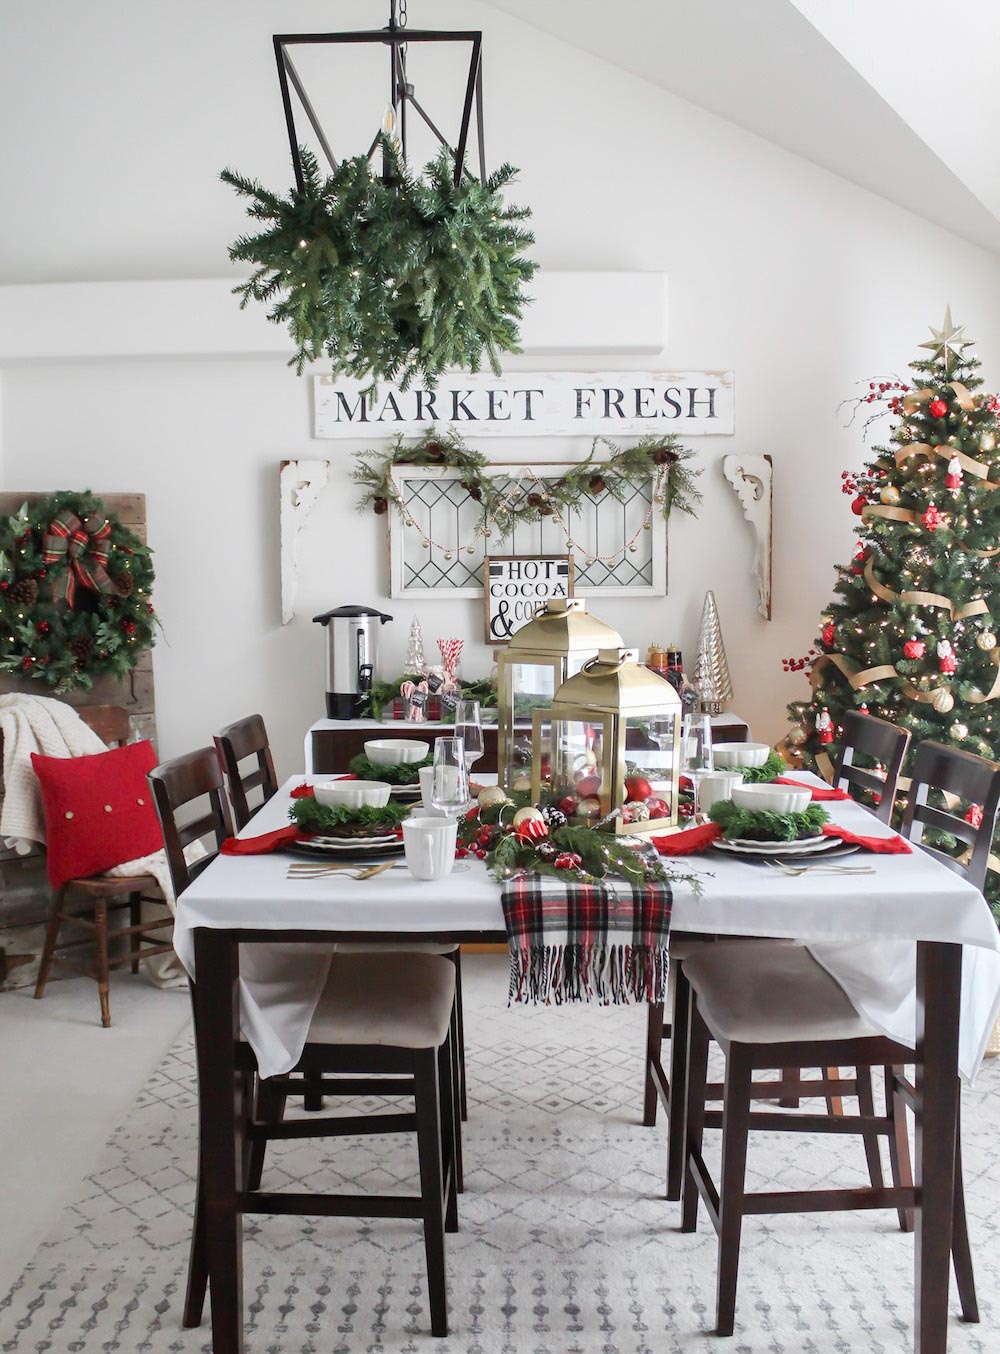 Holiday decorated Dining room containing a table with a with cloth, red, green and gold decor with a Christmas tree in the far right corner